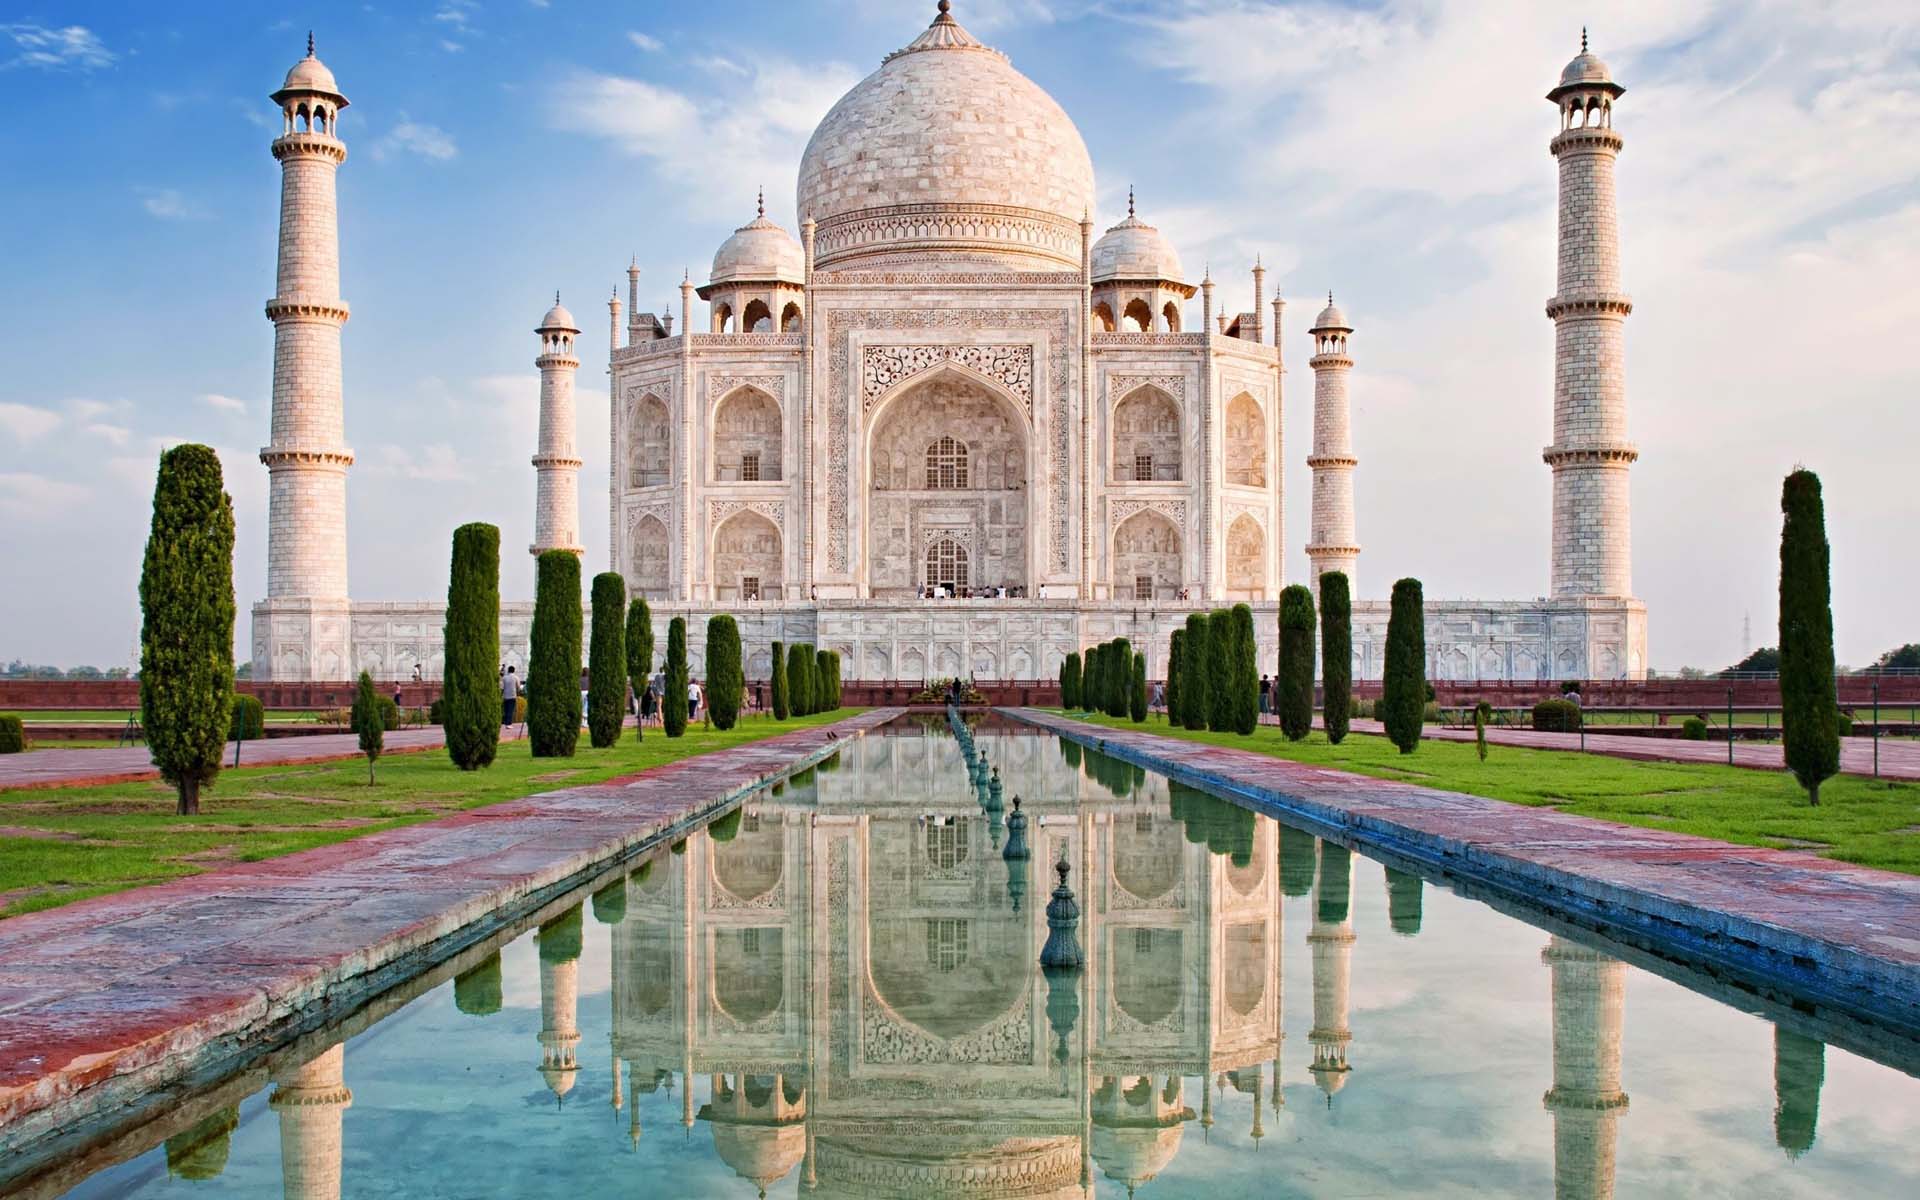 The ivory white marble front of the Taj Mahal building, in India, with its water feature in the foreground and blue sky behind